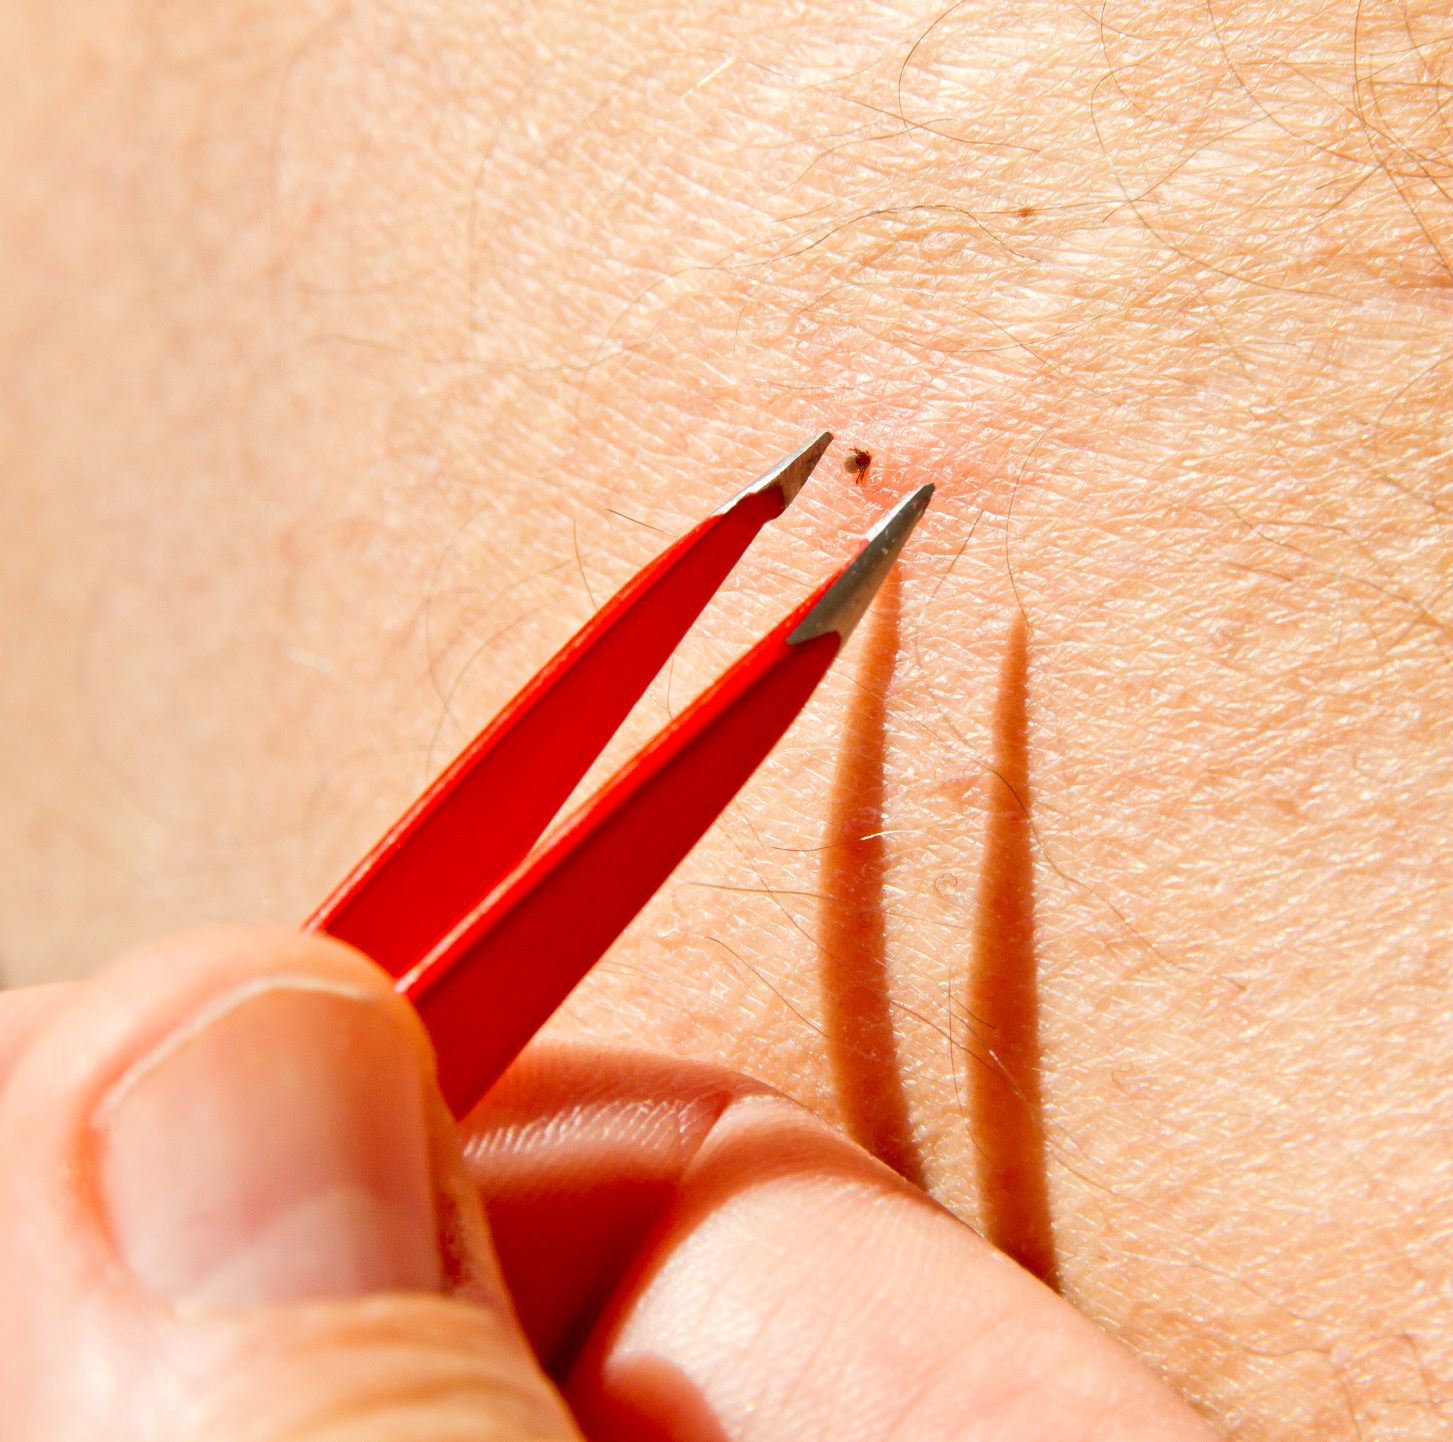 Use tweezers to remove ticks embedded in the skin.